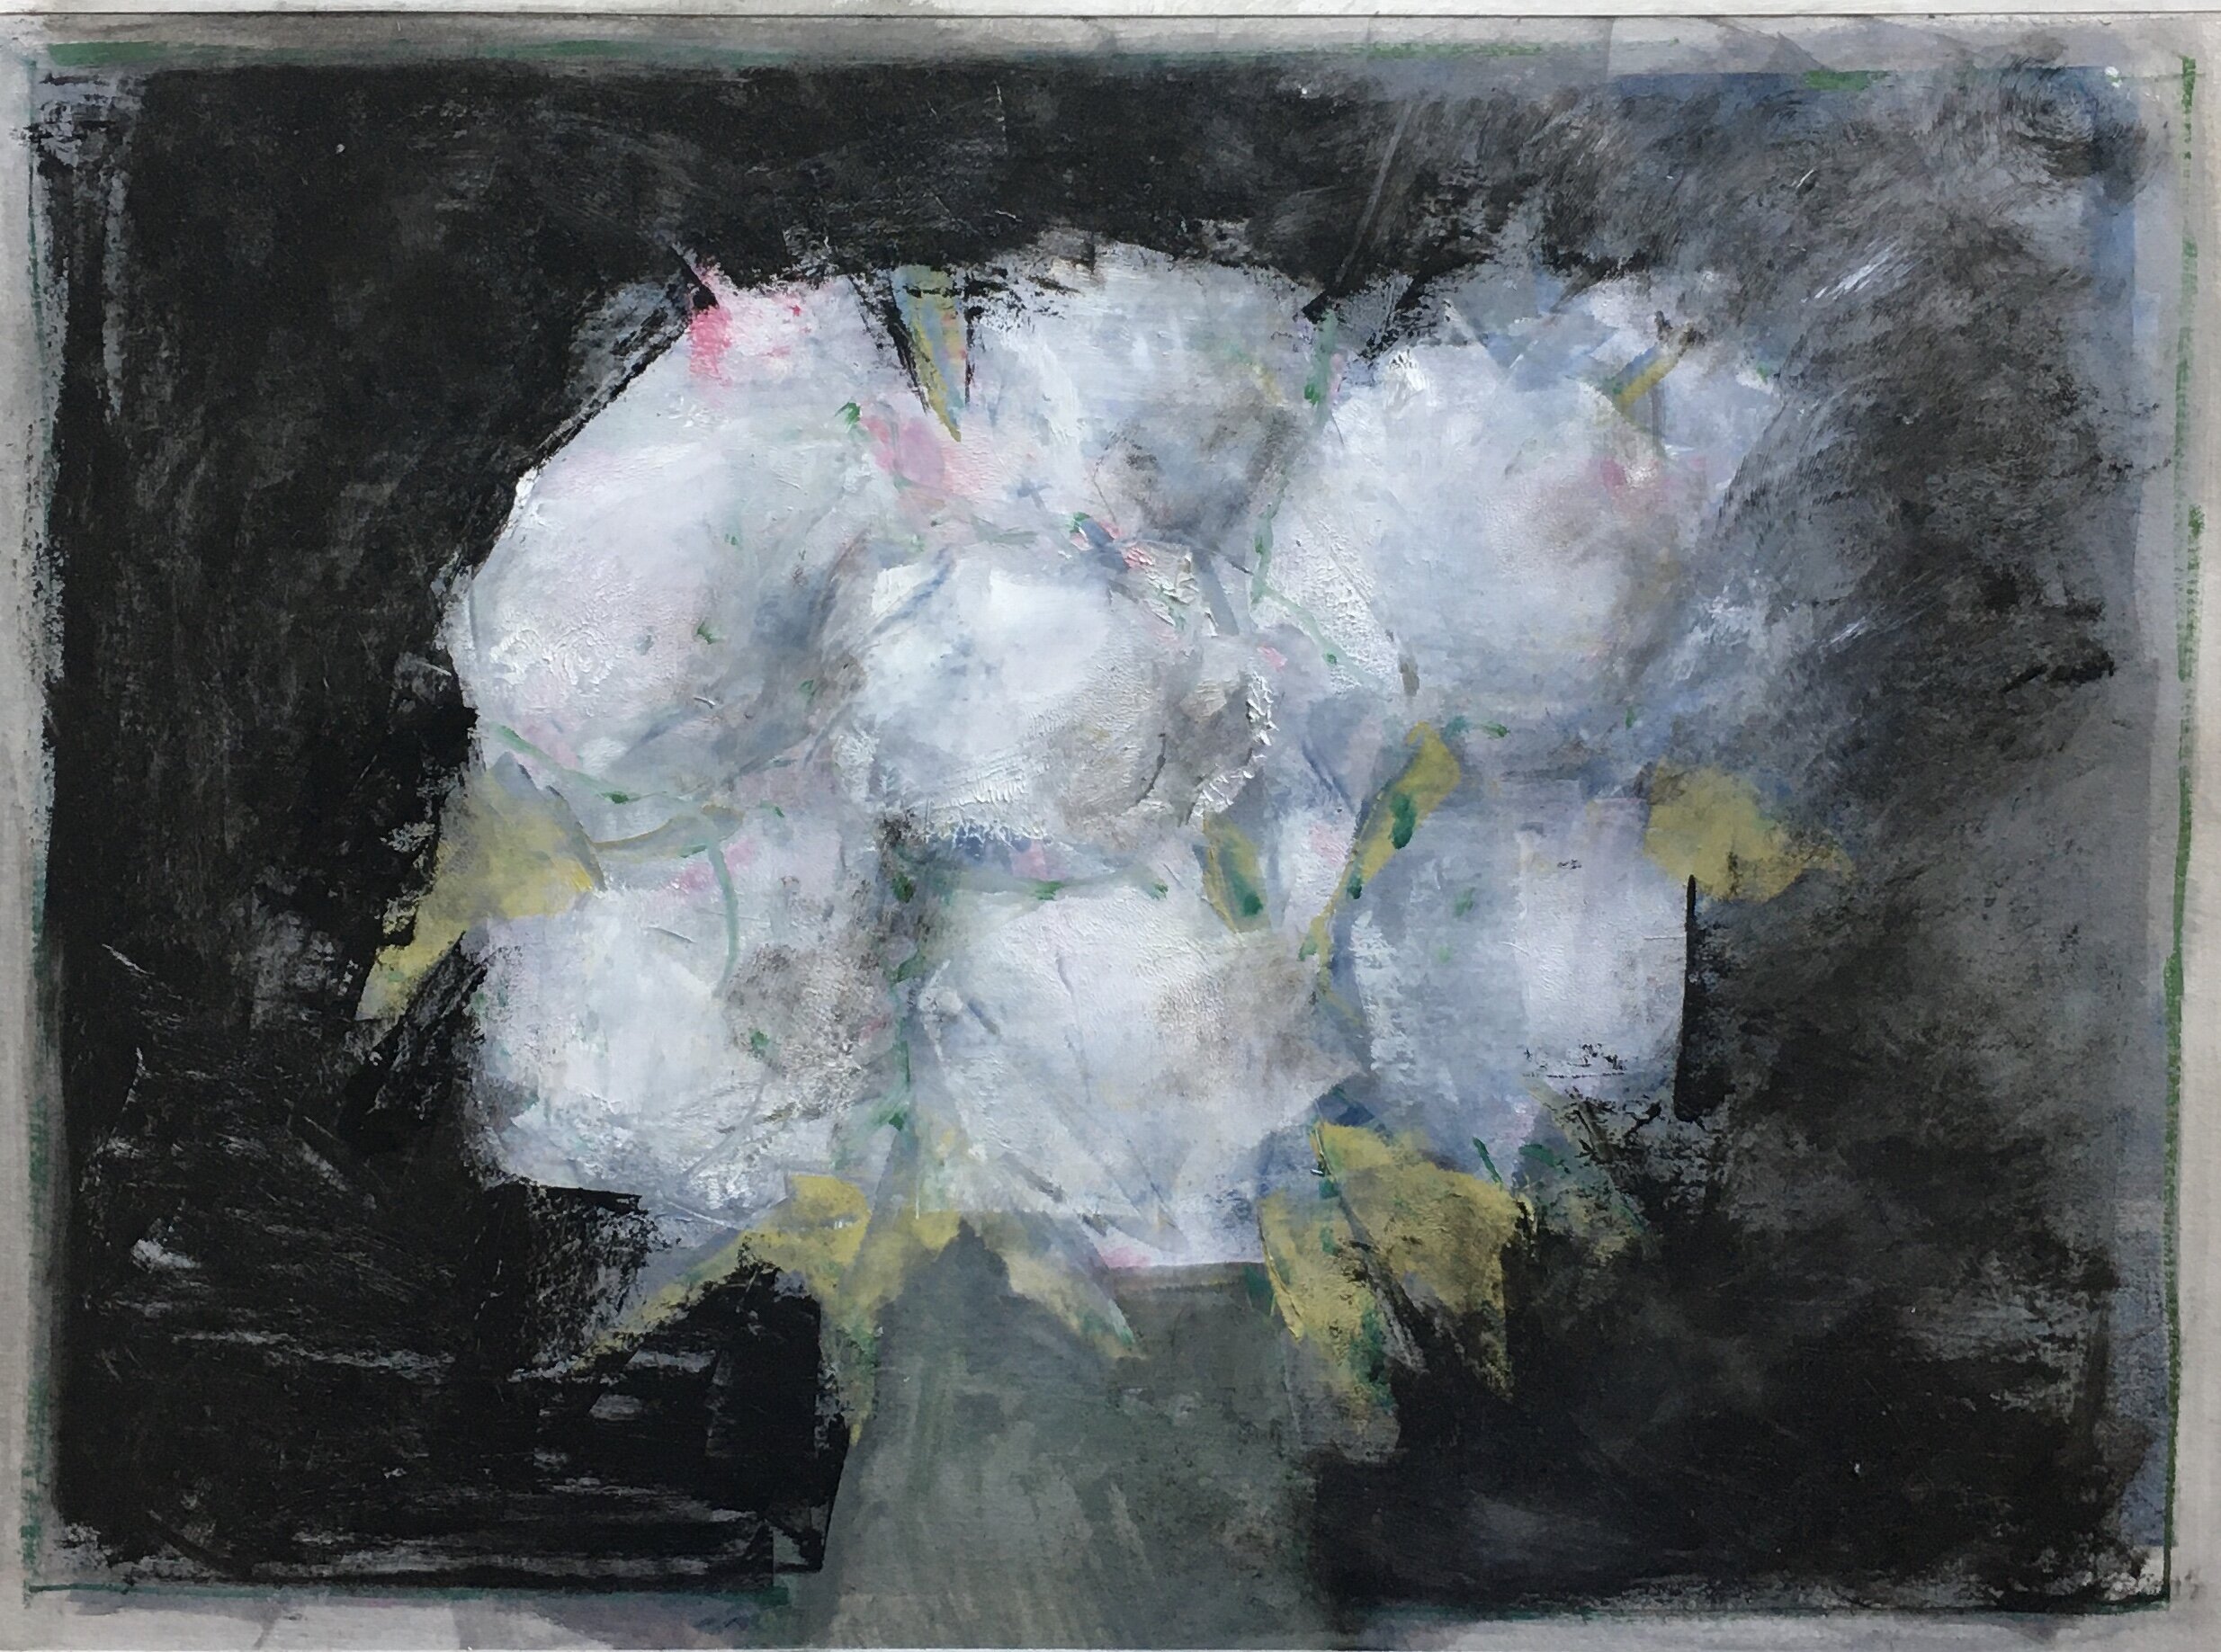 Peonies, Oil on Paper, 13 by 15 inches, 2018.